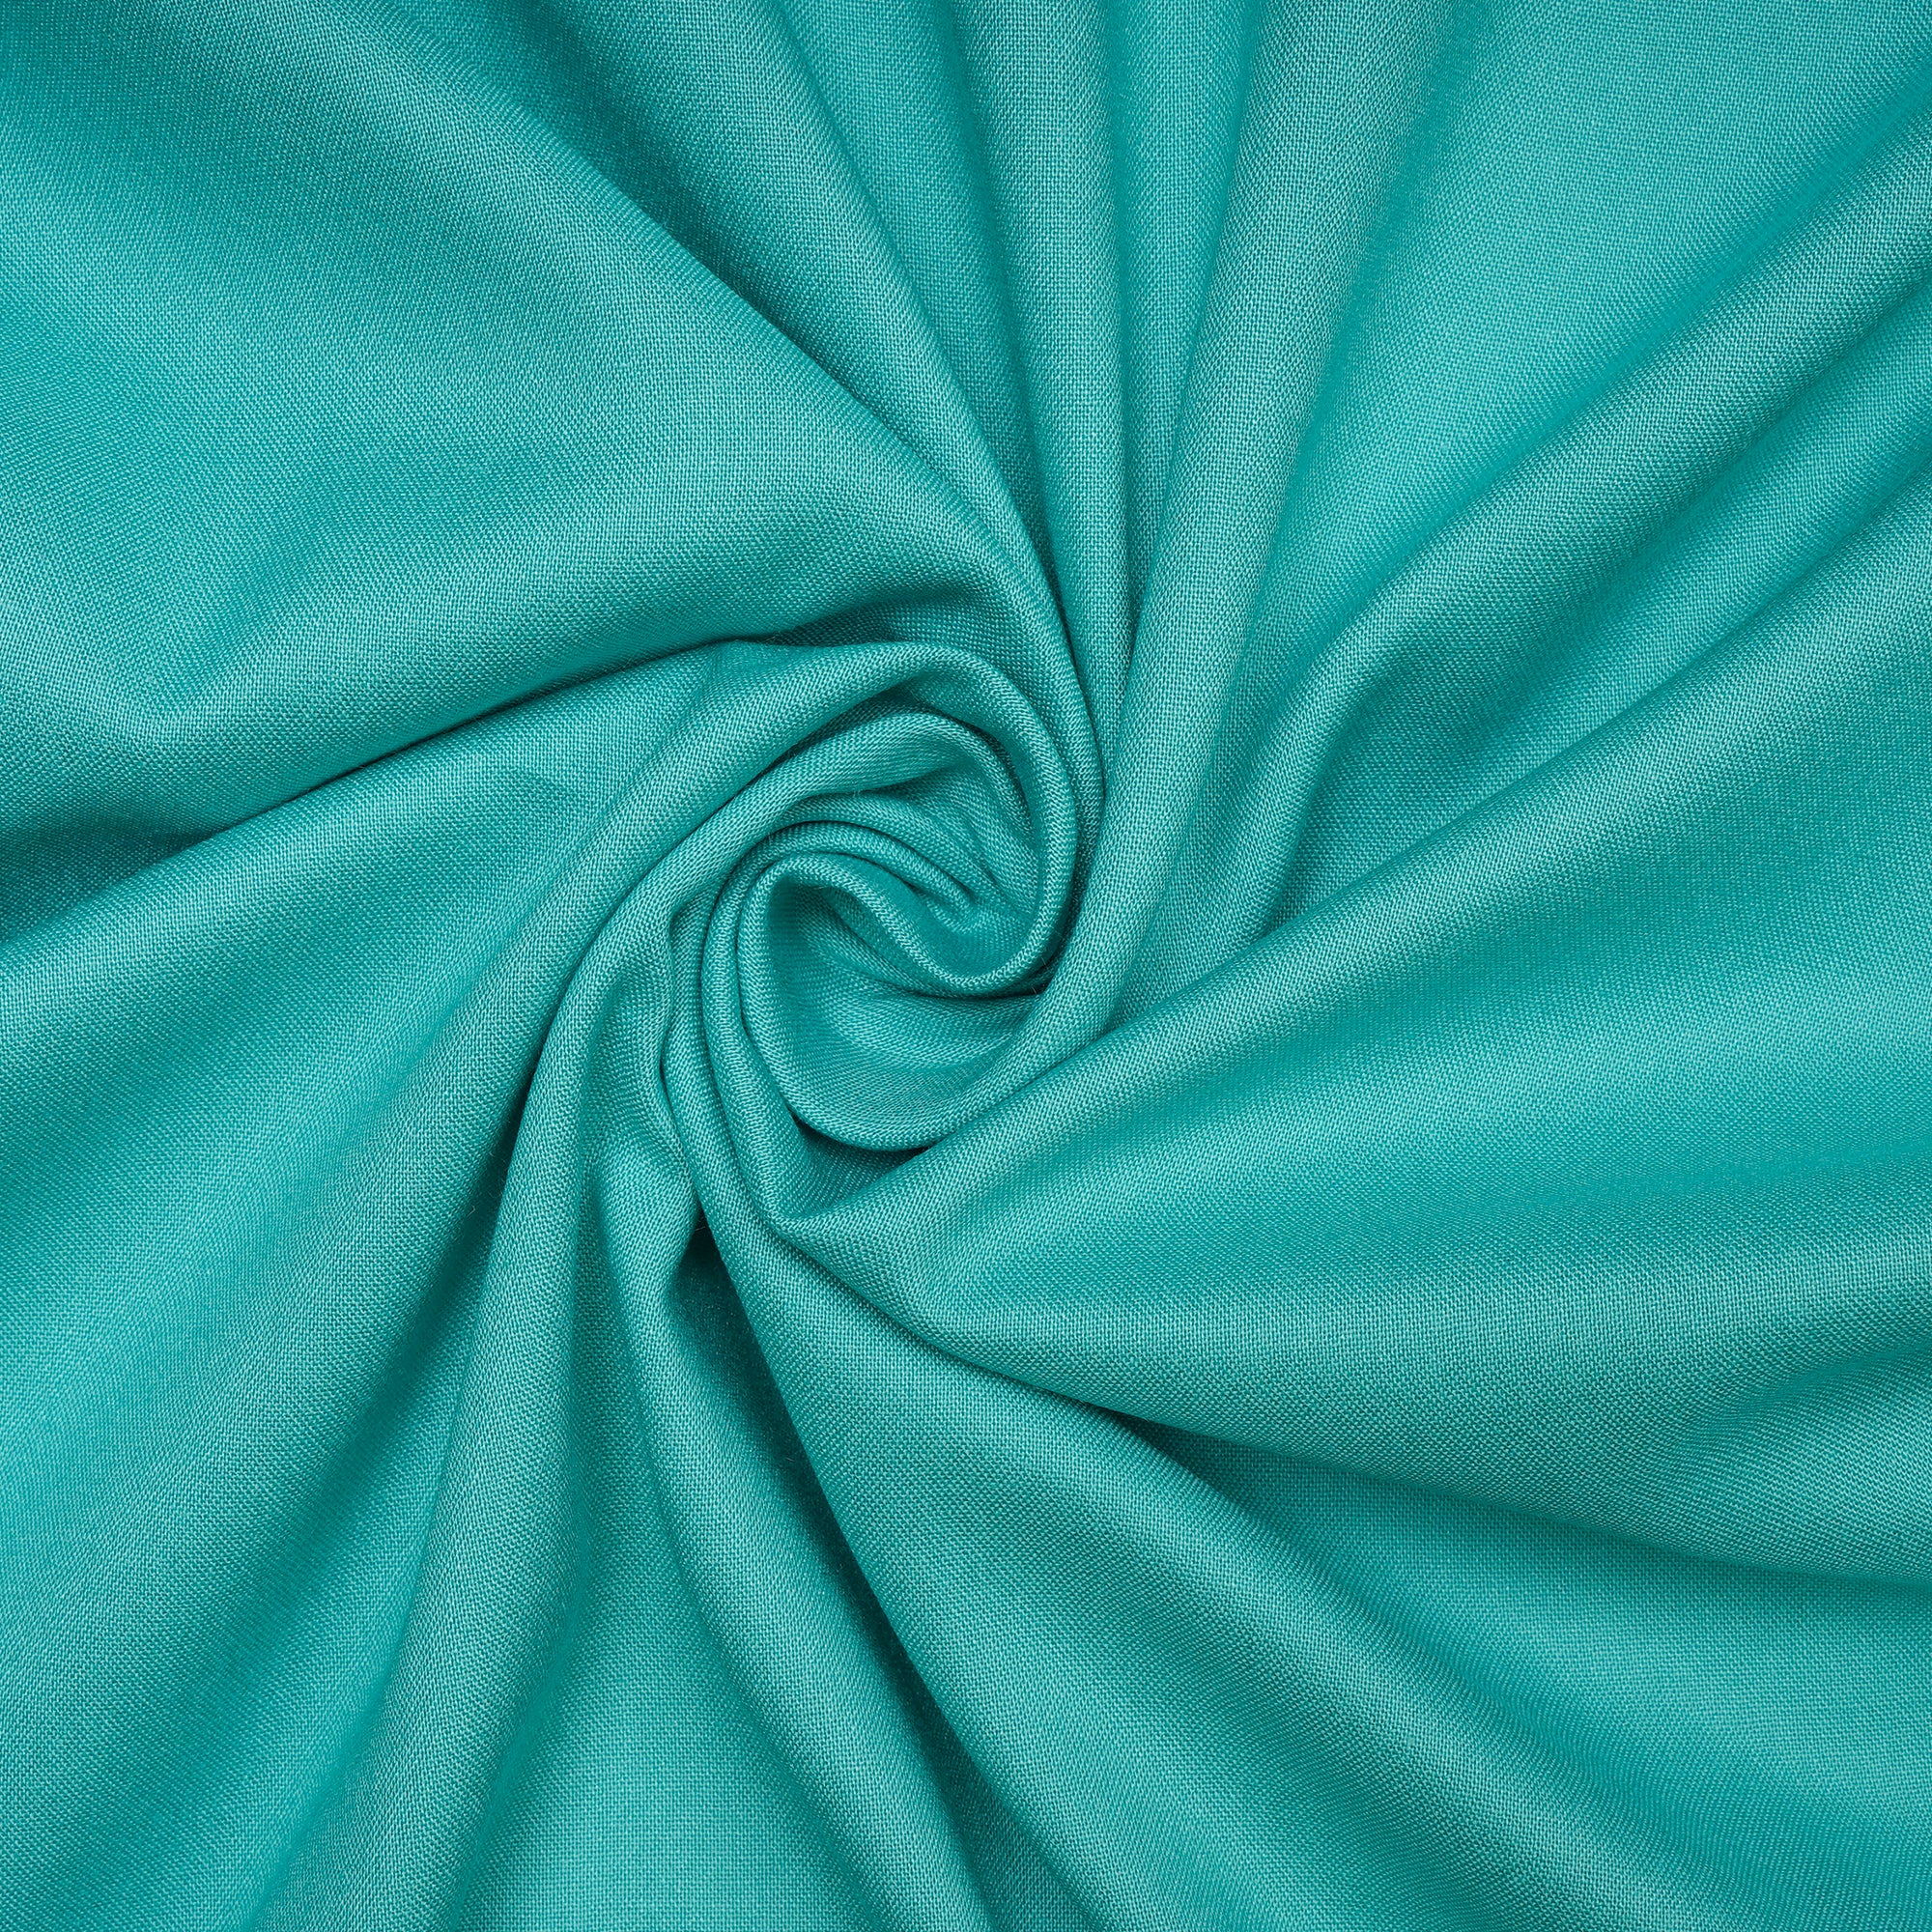 Turquoise Mill Dyed Rayon Fabric